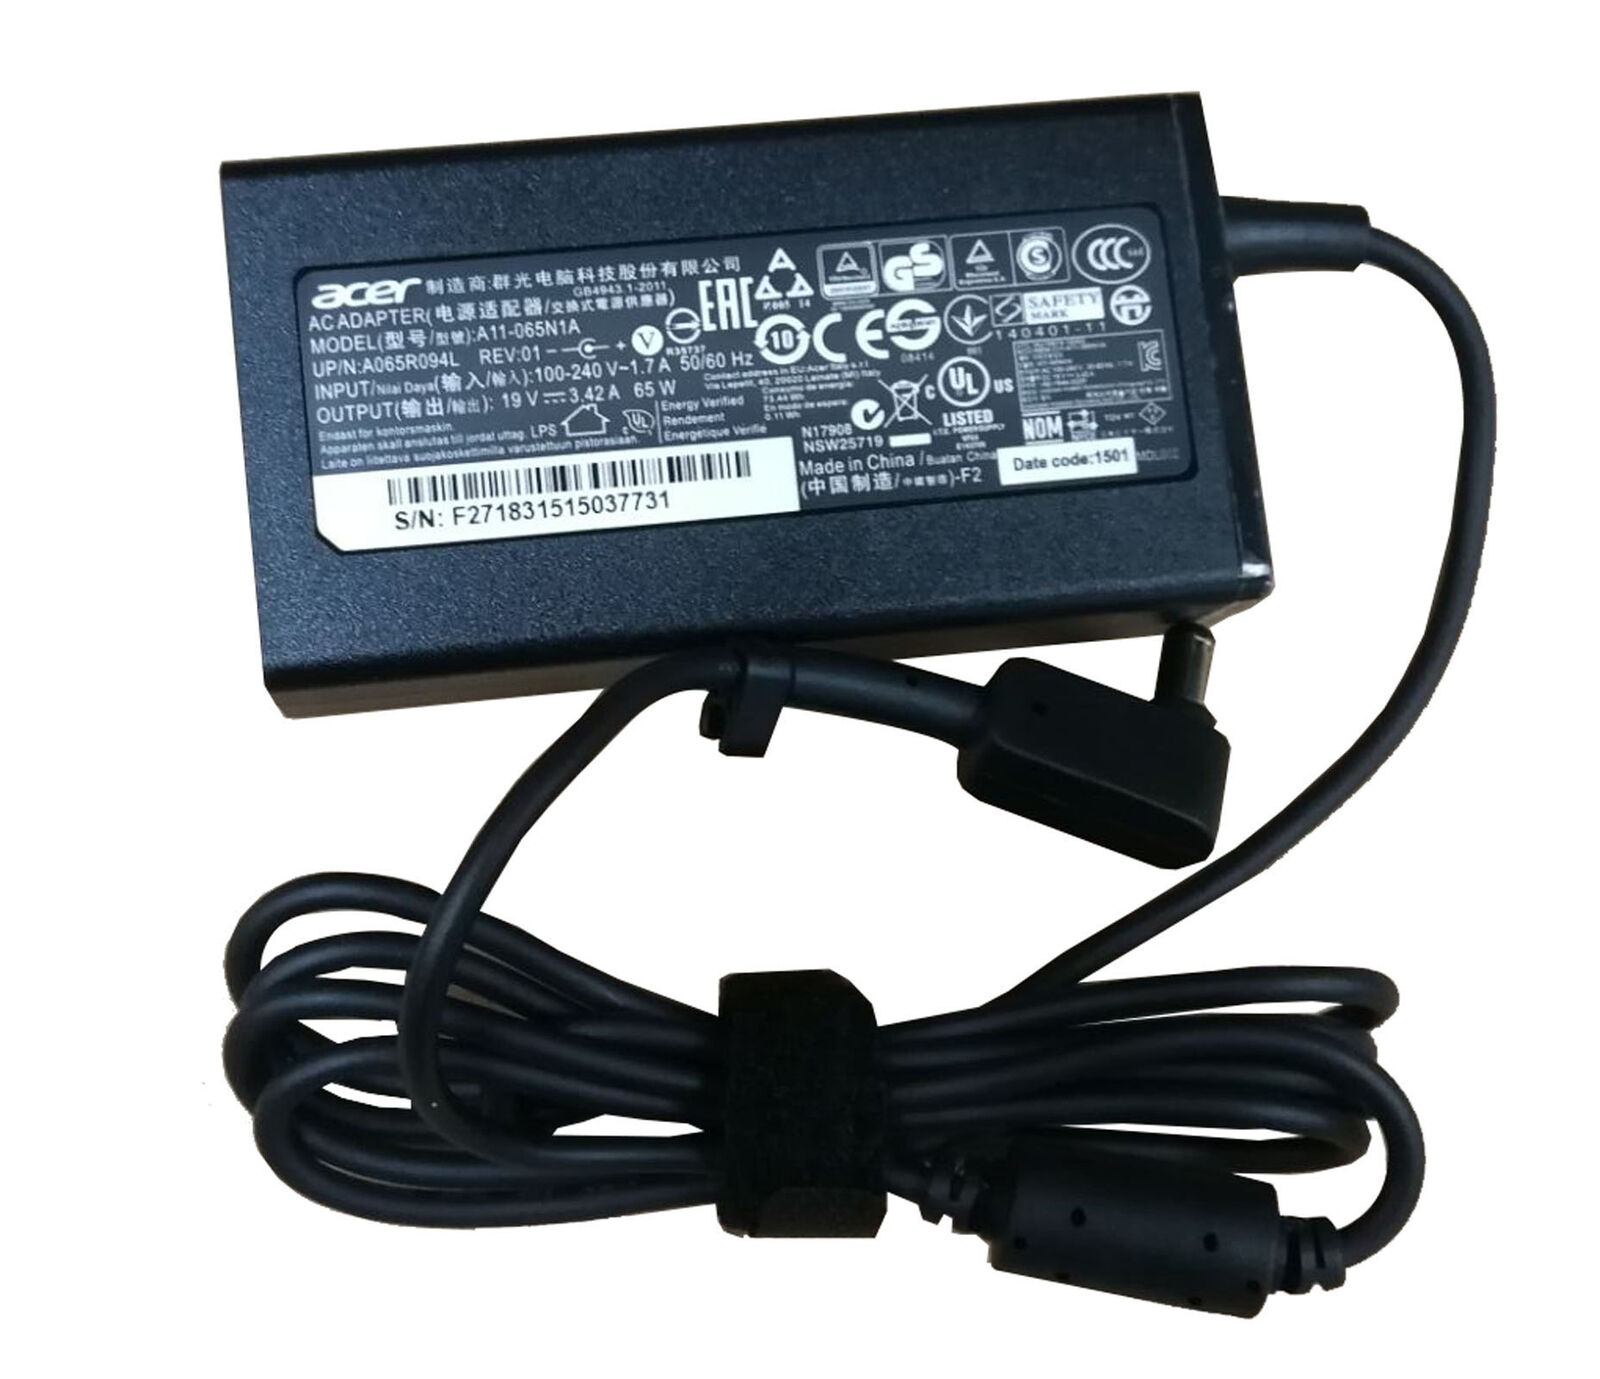 65W Acer Aspire One Cloudbook AO1-131-C9RK Charger AC Adapter Power